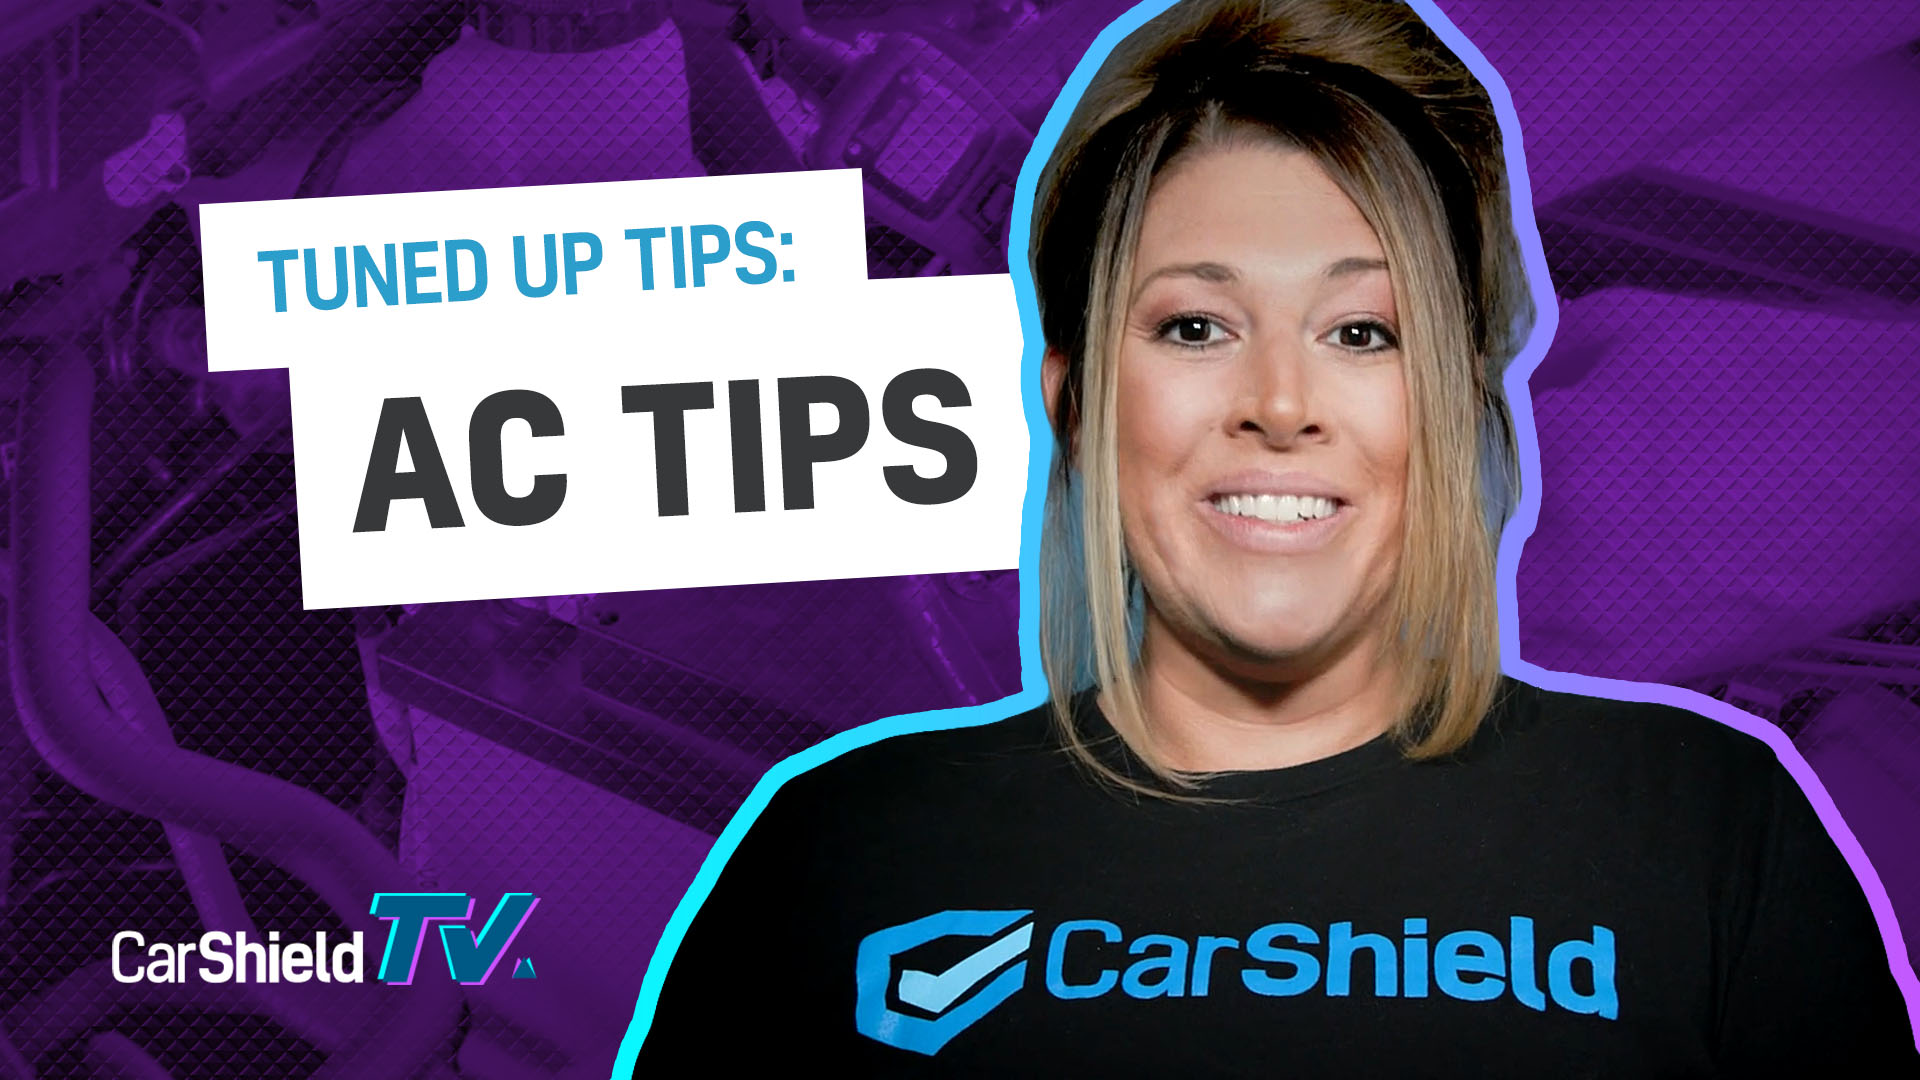 AC tips to keep your car cool